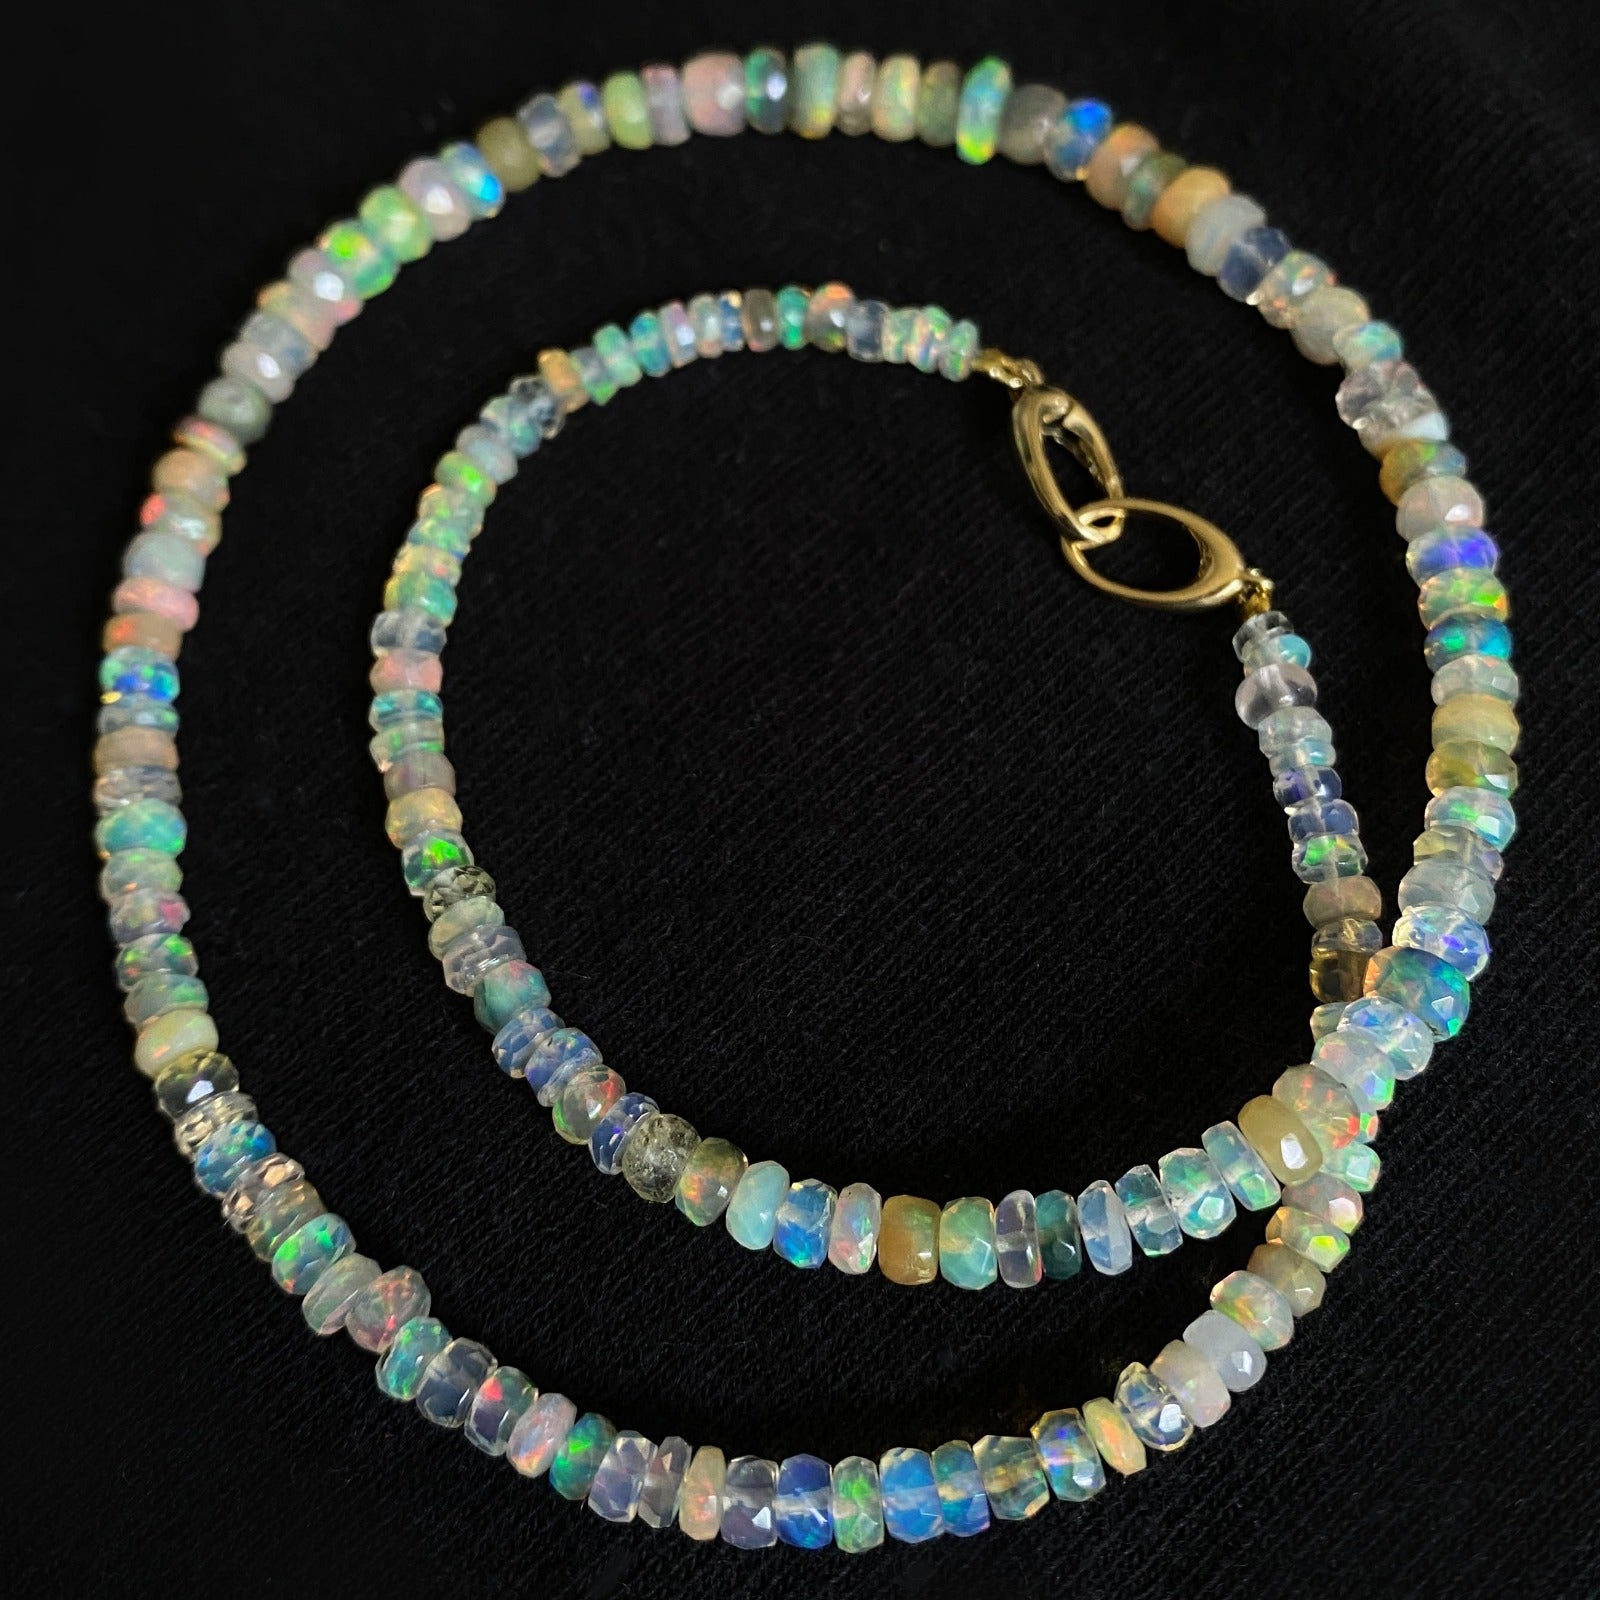 Shimmering beaded necklace made of faceted opals in shades of white, clear, and yellow on a gold linking ovals clasp.